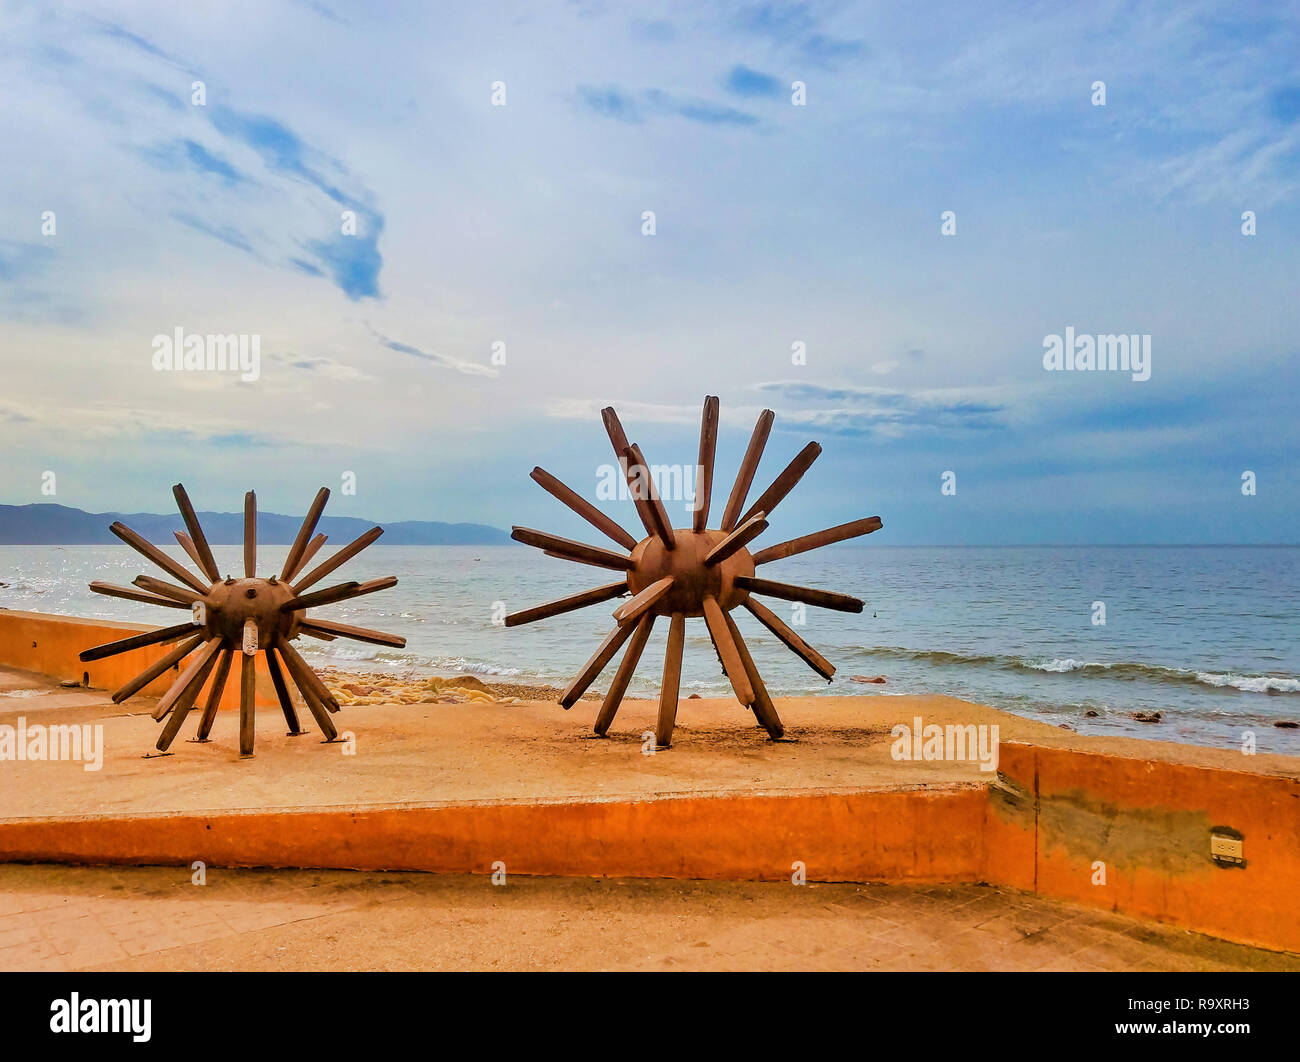 PUERTO VALLARTA, MEXICO - JANUARY 30, 2018 - “Eriza-Dos (Standing on End)” is rustic-looking sculpture of two sea urchins, sitting on Malecon, a prome Stock Photo